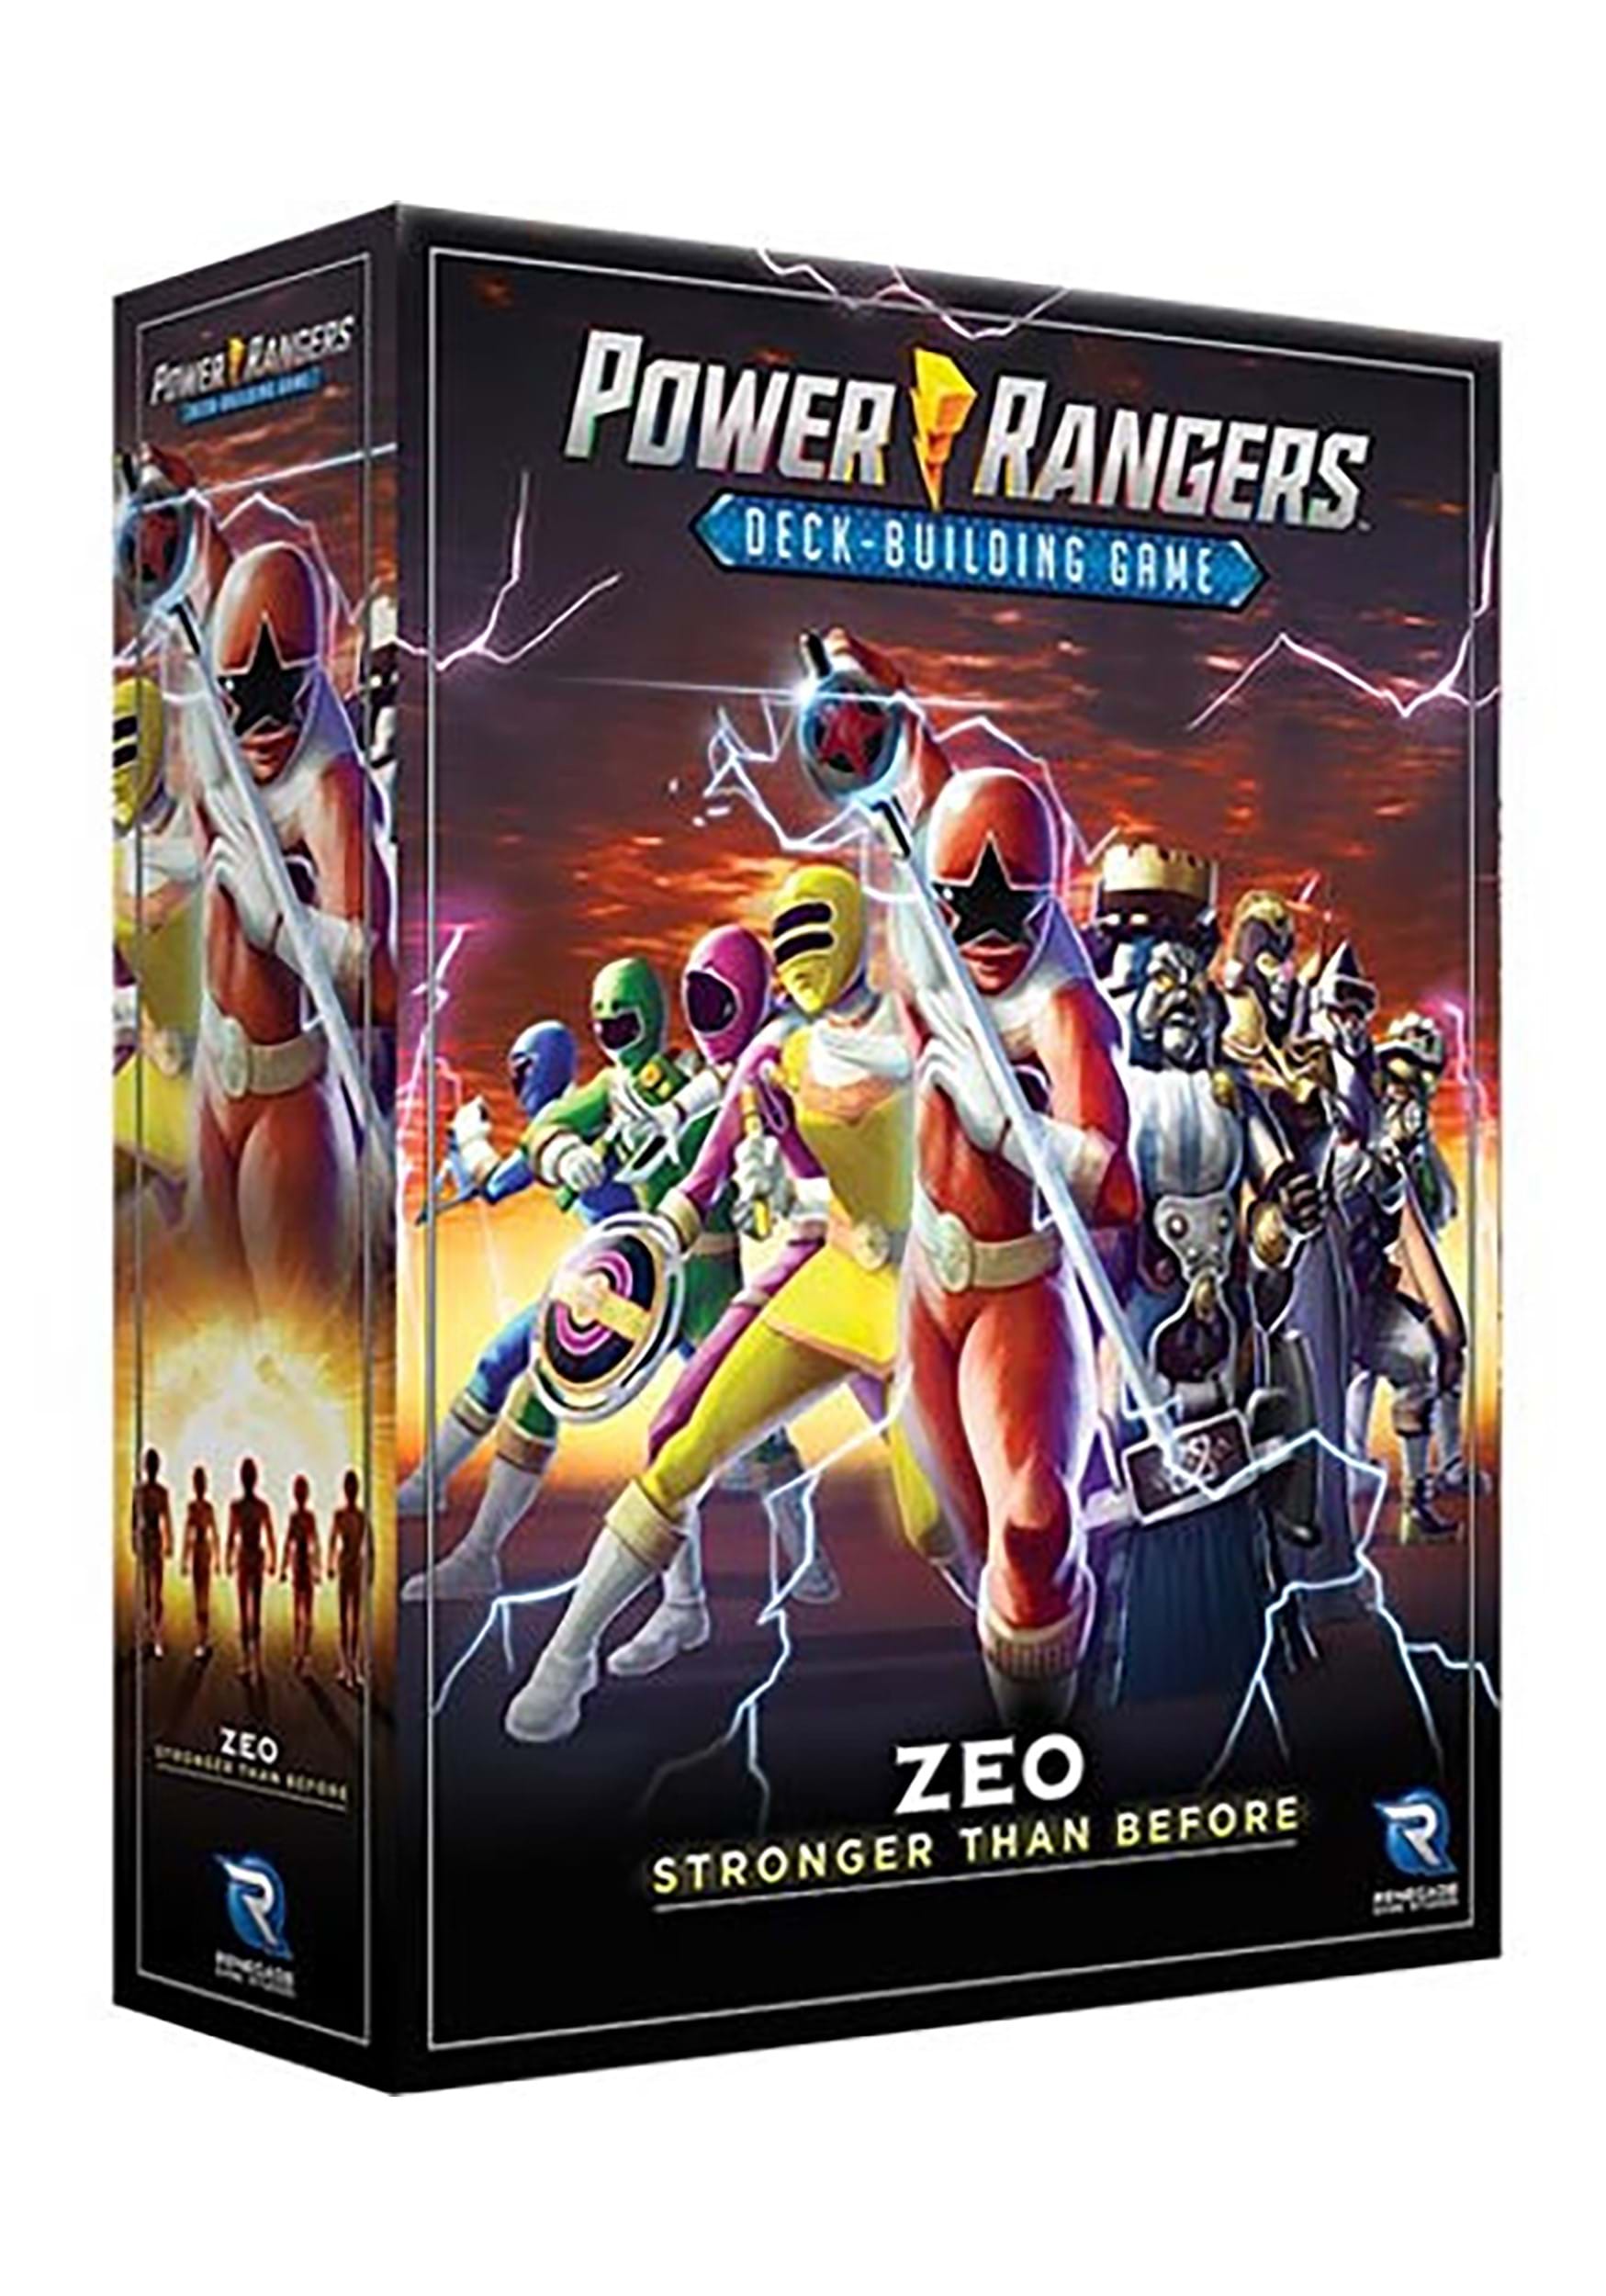 Power Rangers - Deck-Building Game: Zeo - Stronger Than Before